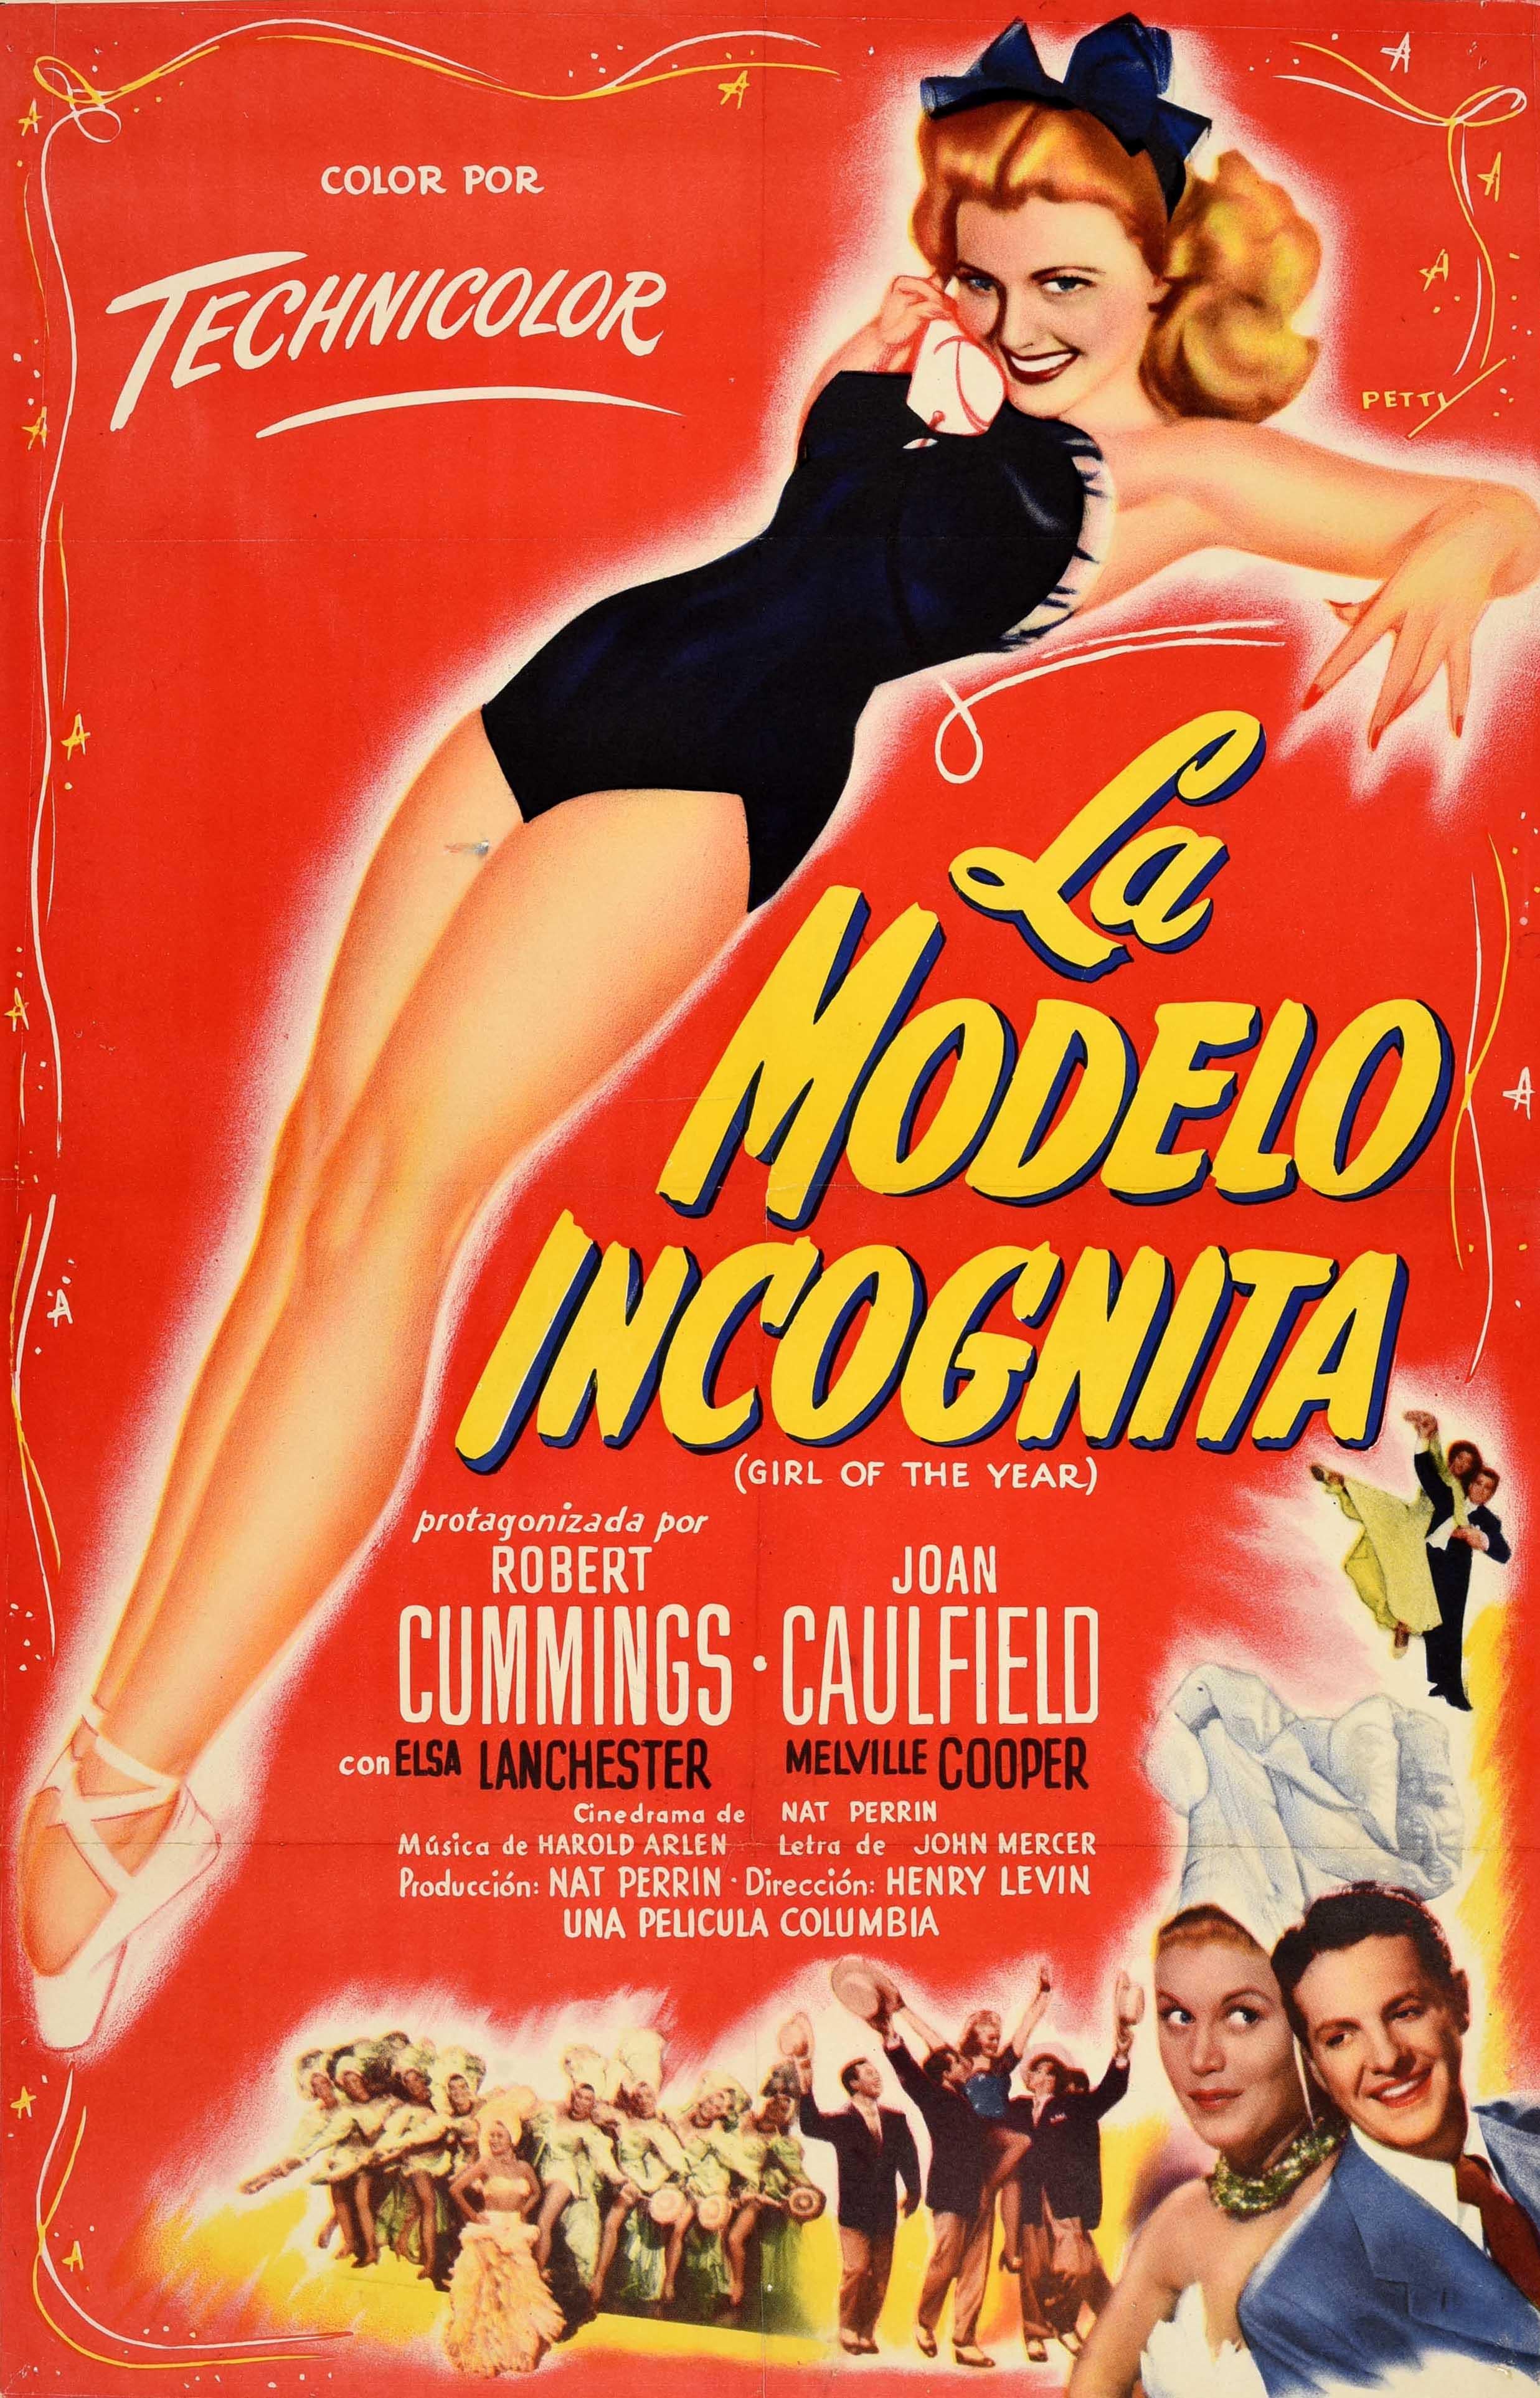 Original vintage movie poster for La Modelo Incognita / Girl of the Year - Design features Joan Caulfield's character wearing a leotard and ballet shoes laying back over the bold yellow title on a red background. More scenes from the film are